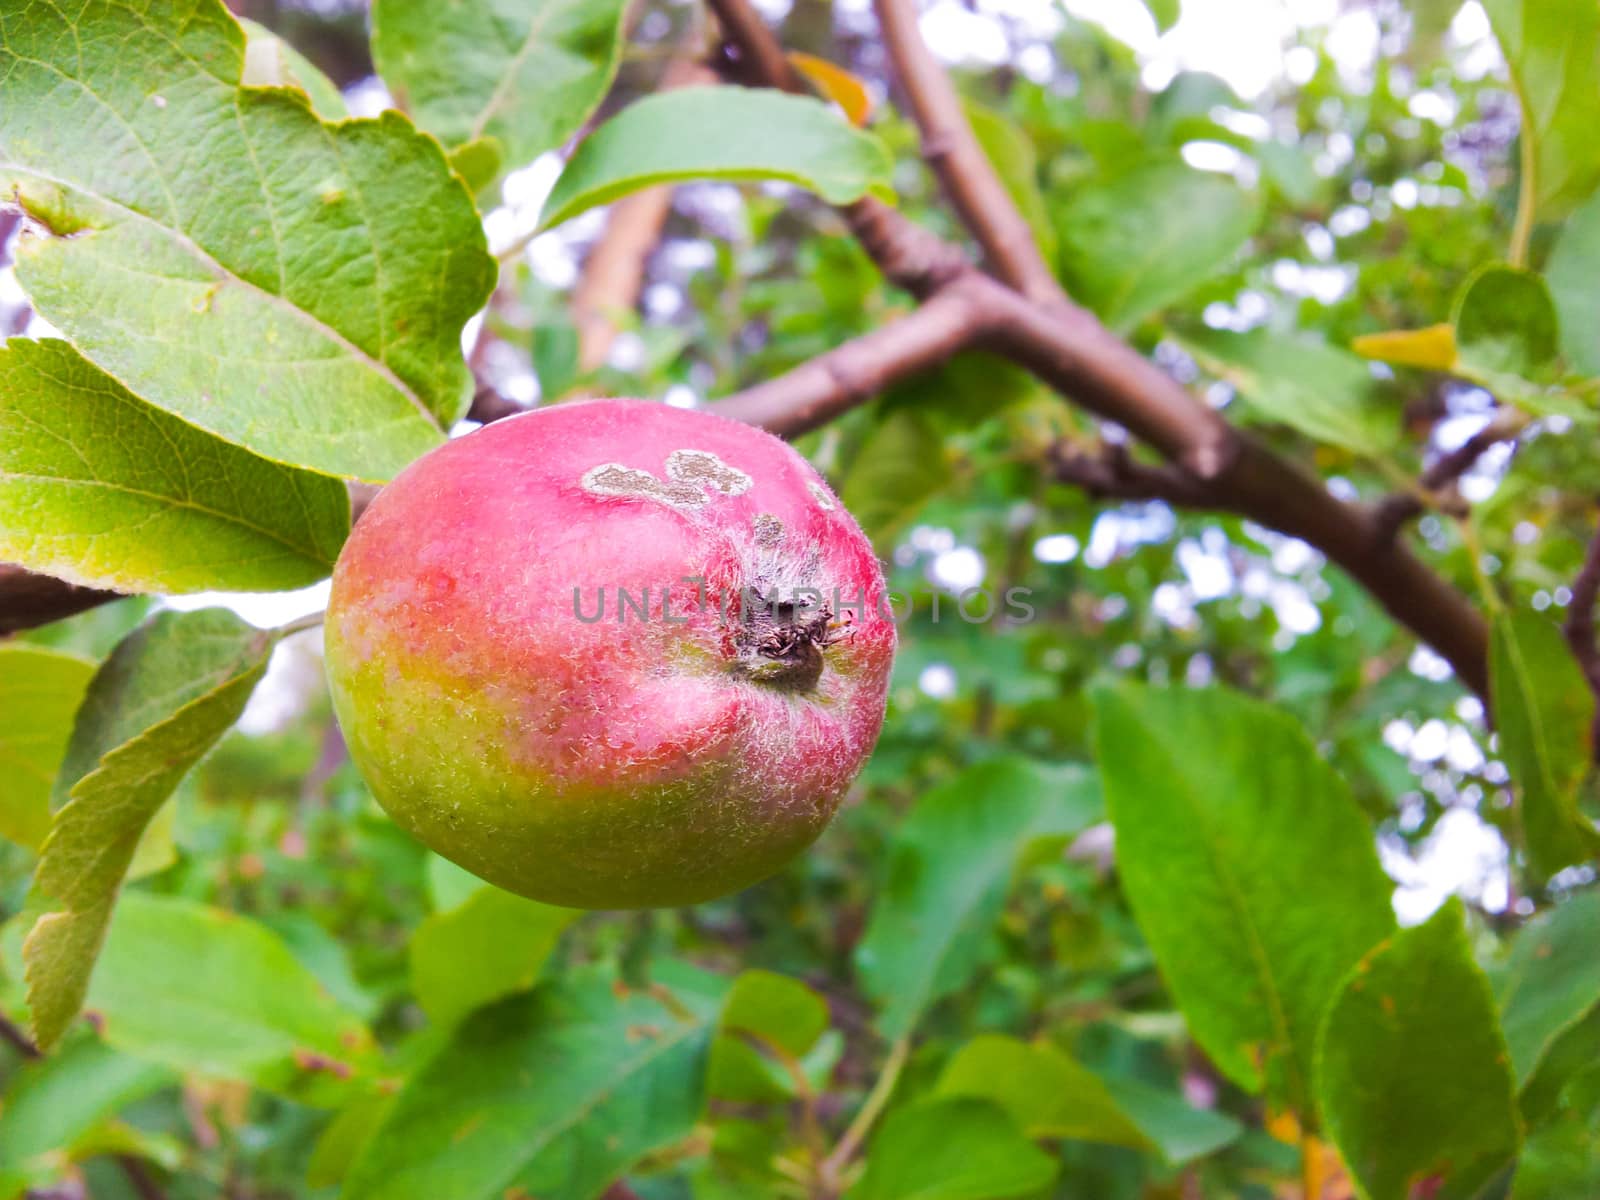 Uncultivated little red and green apple ripe on tree